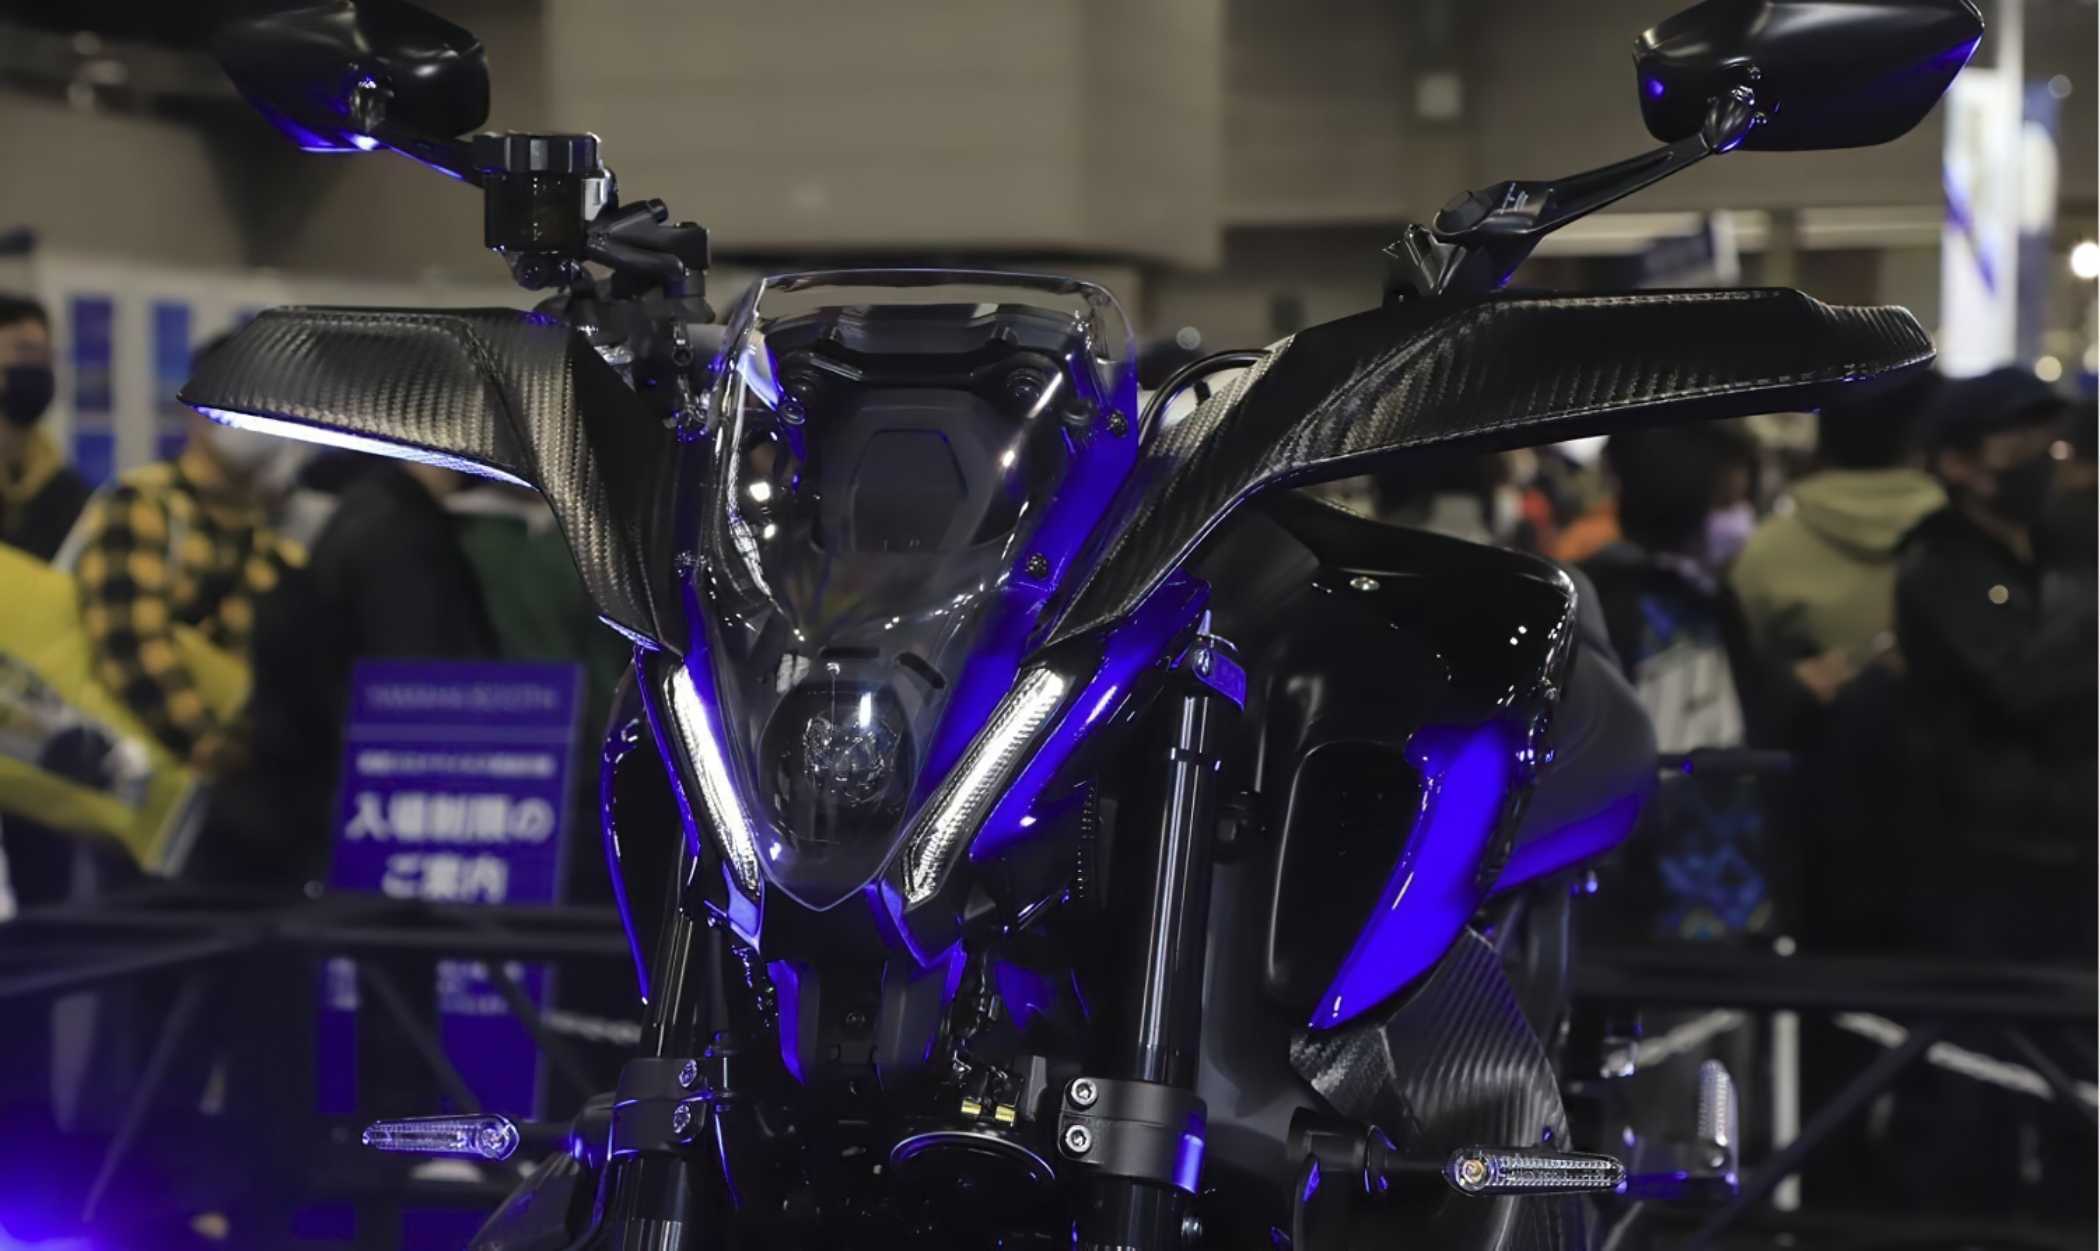 Yamaha MT-09 Cyber Rally
- also in the MOTORCYCLES.NEWS APP